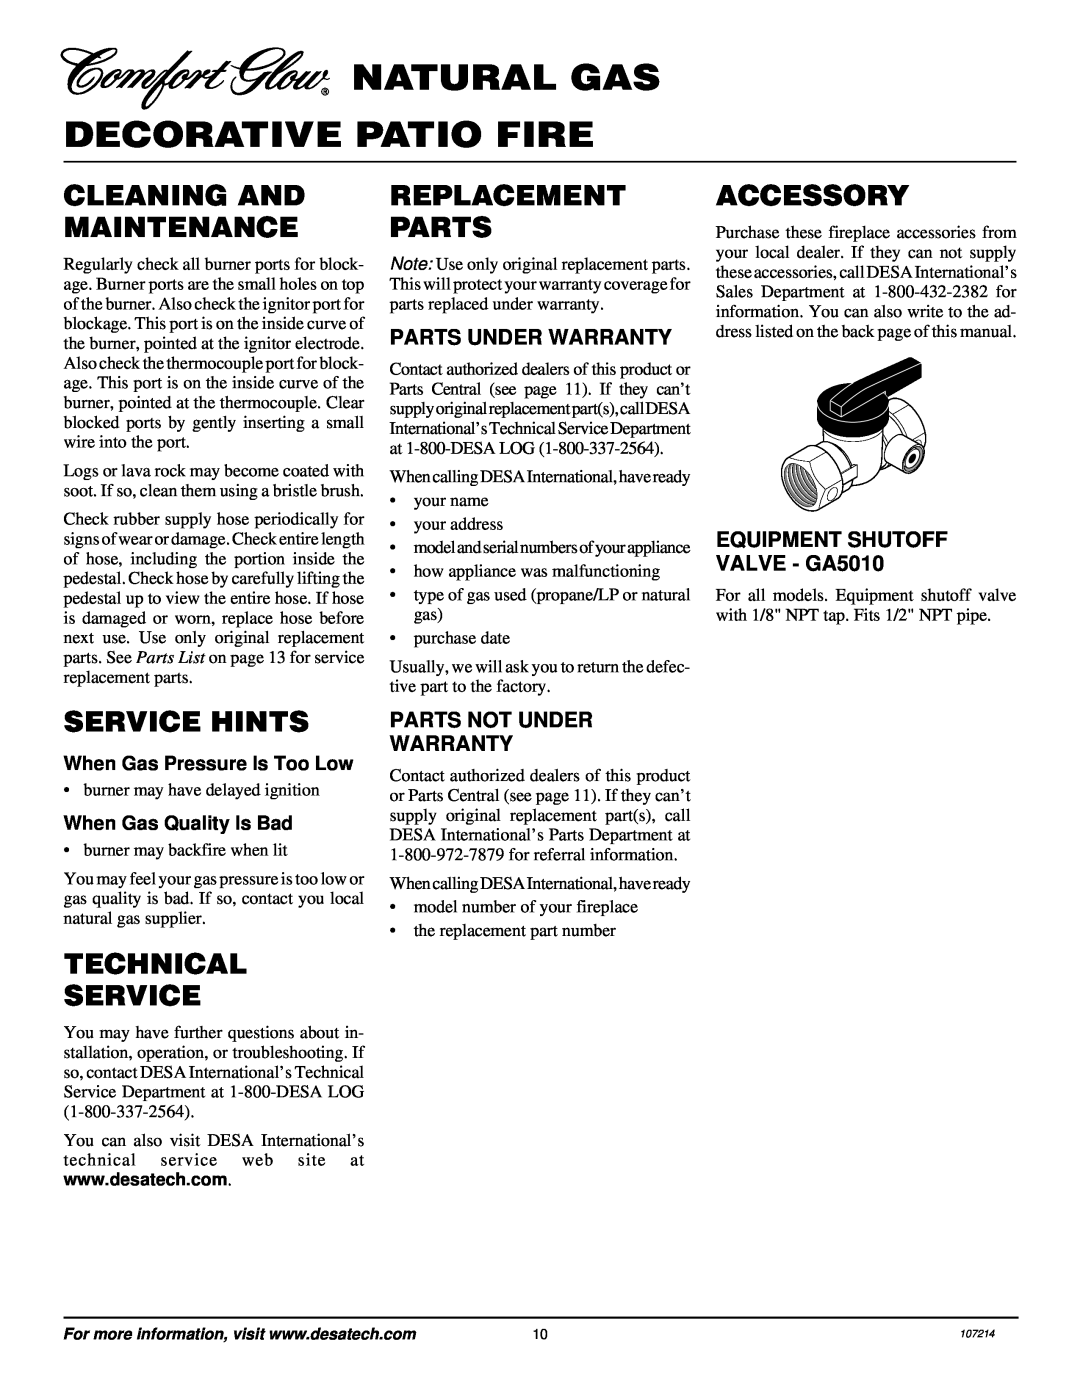 Desa Tech PC4670NG, PC3460NG Cleaning And Maintenance, Replacement Parts, Accessory, Service Hints, Technical Service 